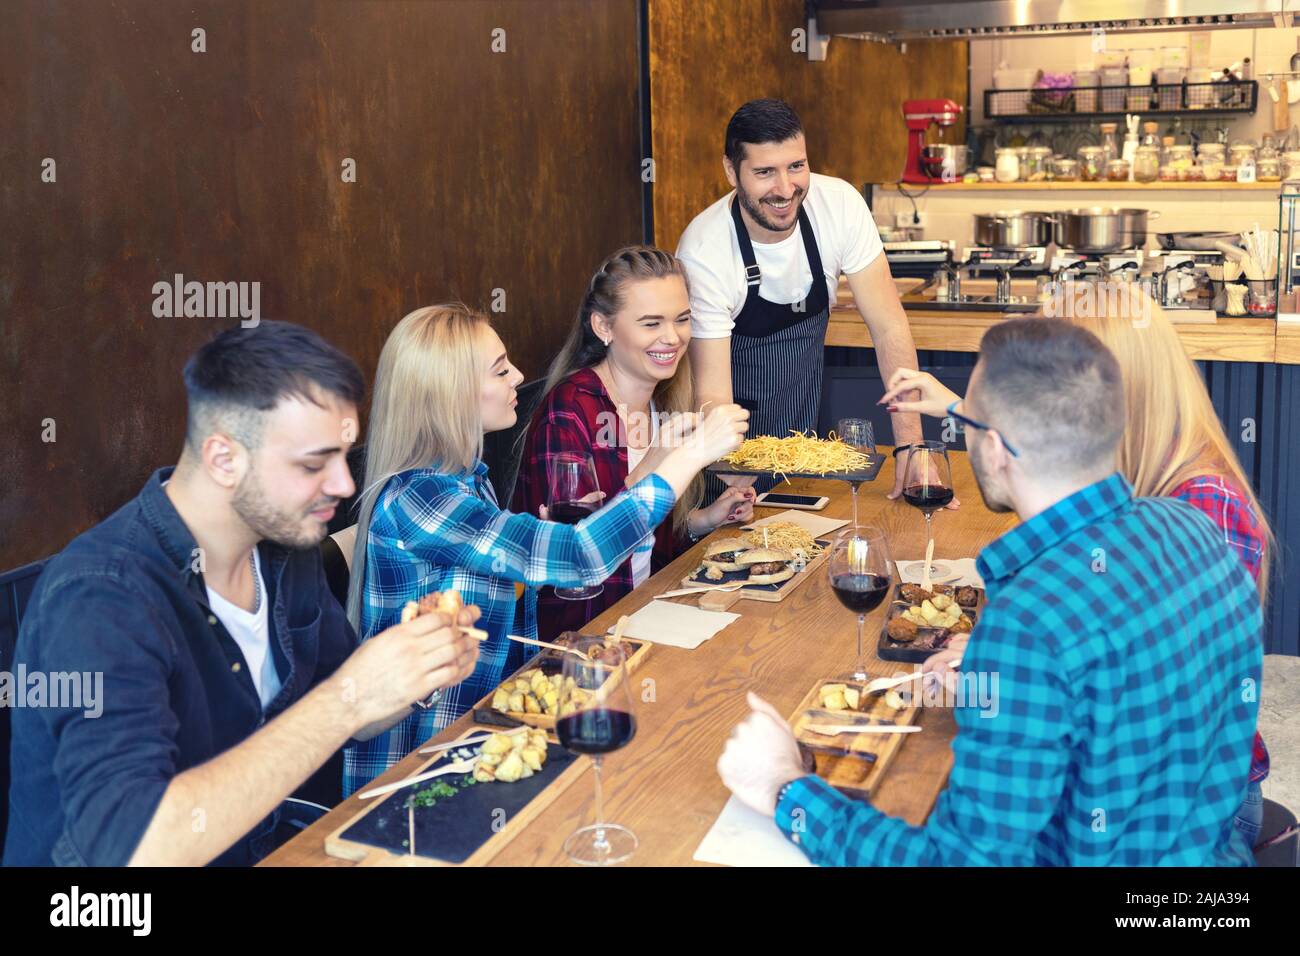 Happy business owner serving food to smiling group of young friends in small family tavern restaurant Stock Photo